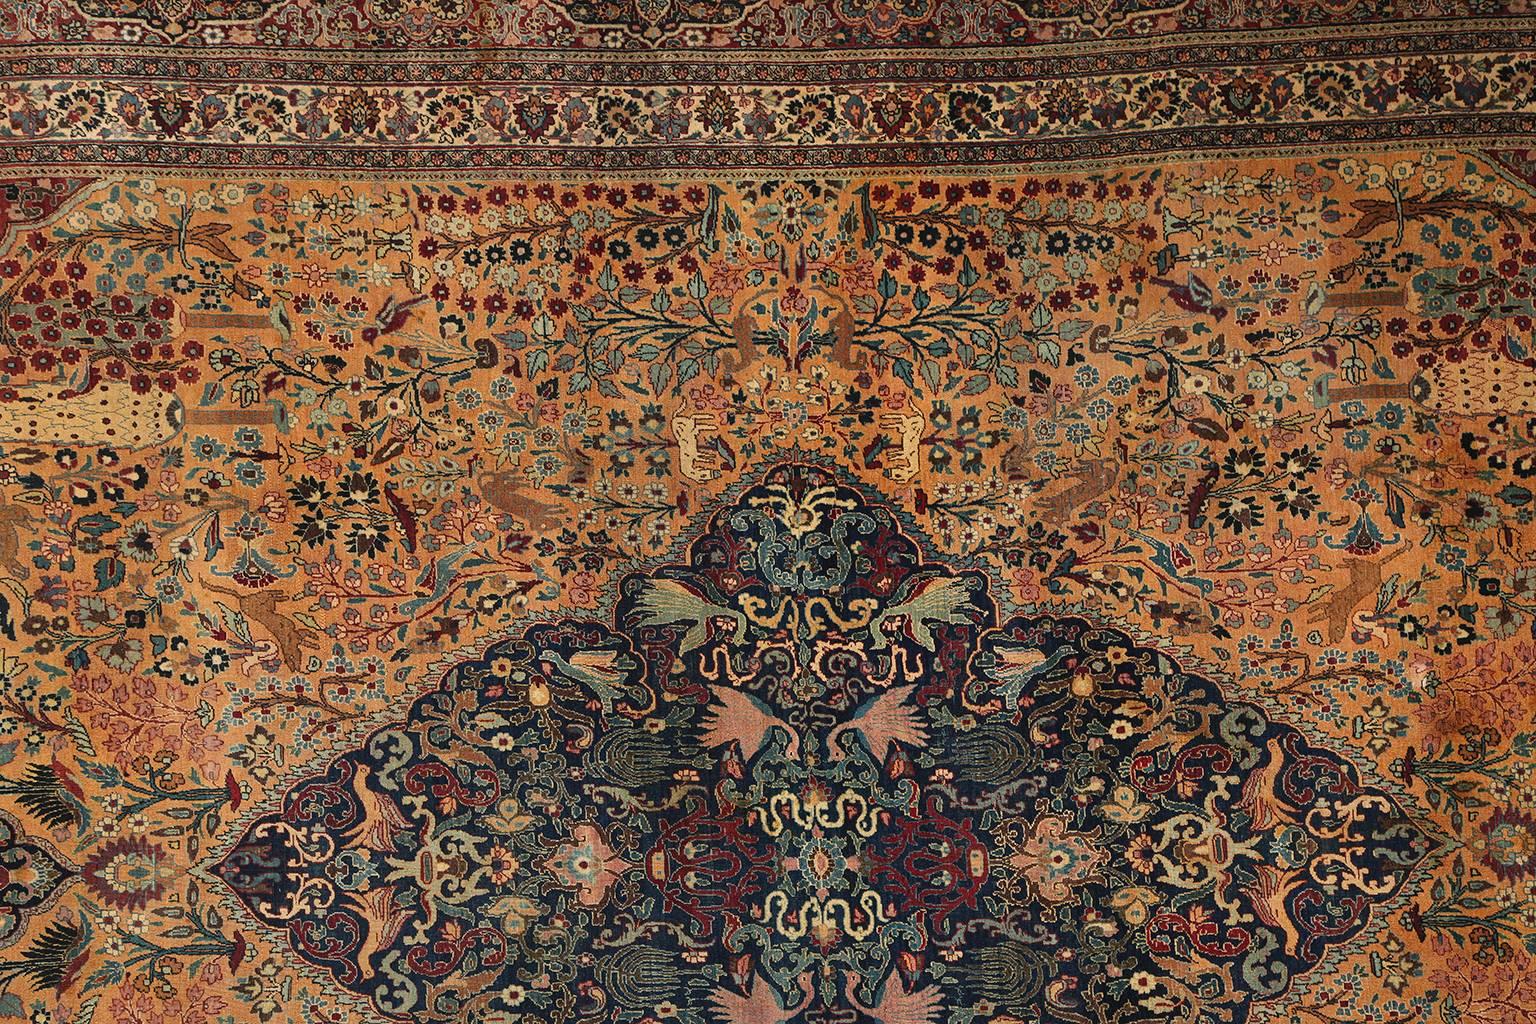 Antique 1870s Persian Tabriz Rug Woven by Order of Prince Shahrukh Mirza, 13x21 For Sale 1